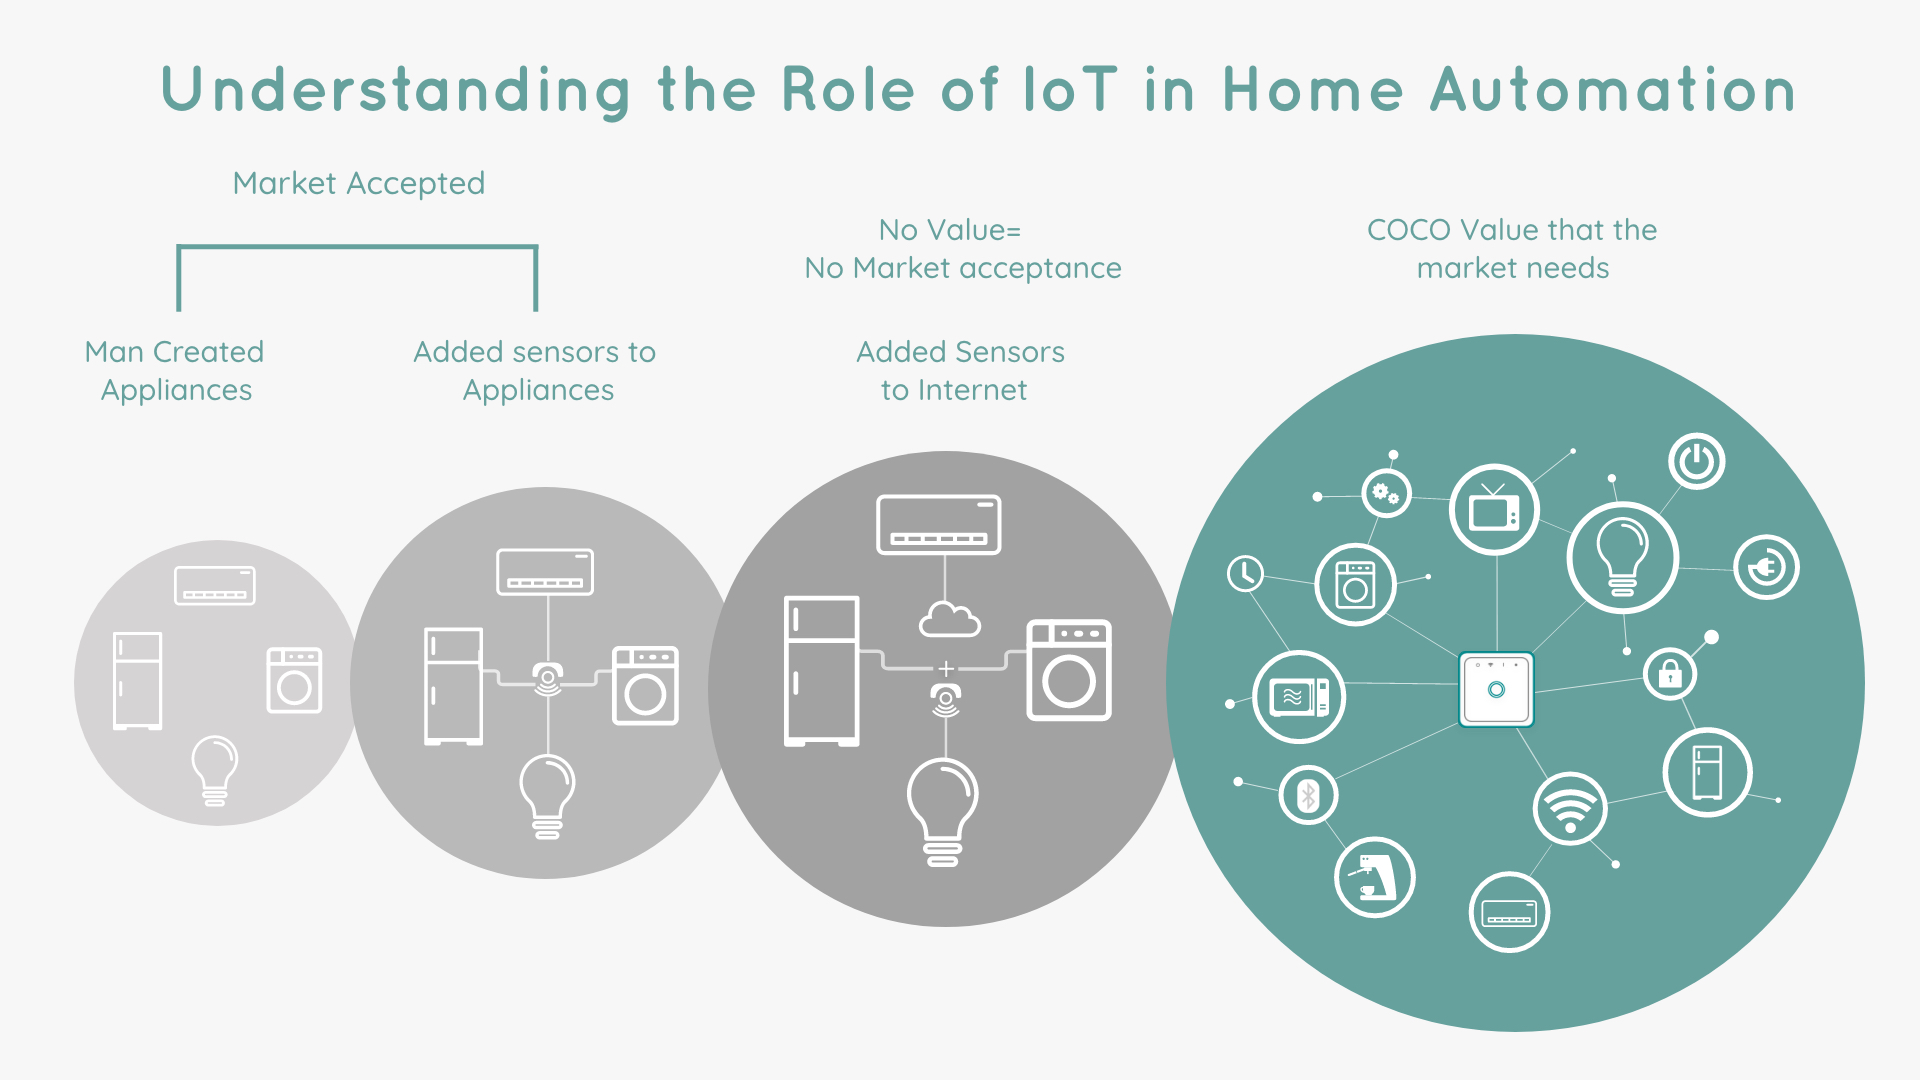 case study on home automation in iot